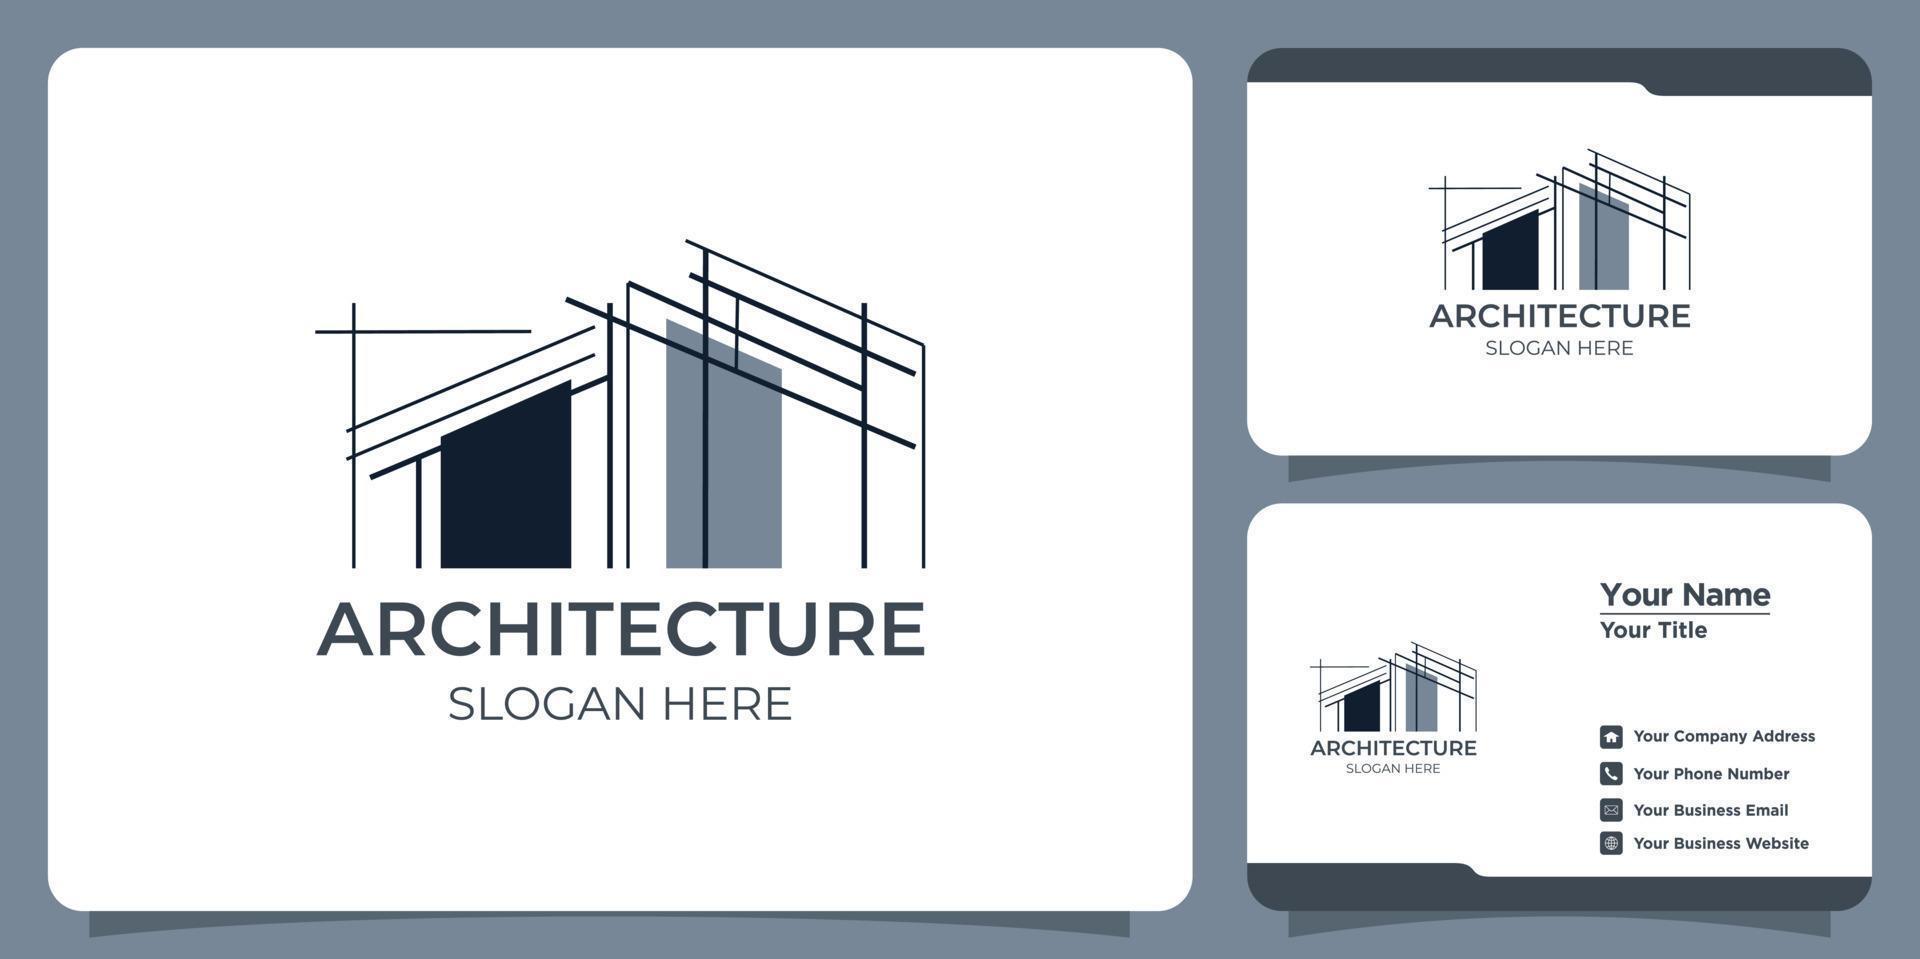 Minimalist architecture logo with line art style logo design and business card template vector